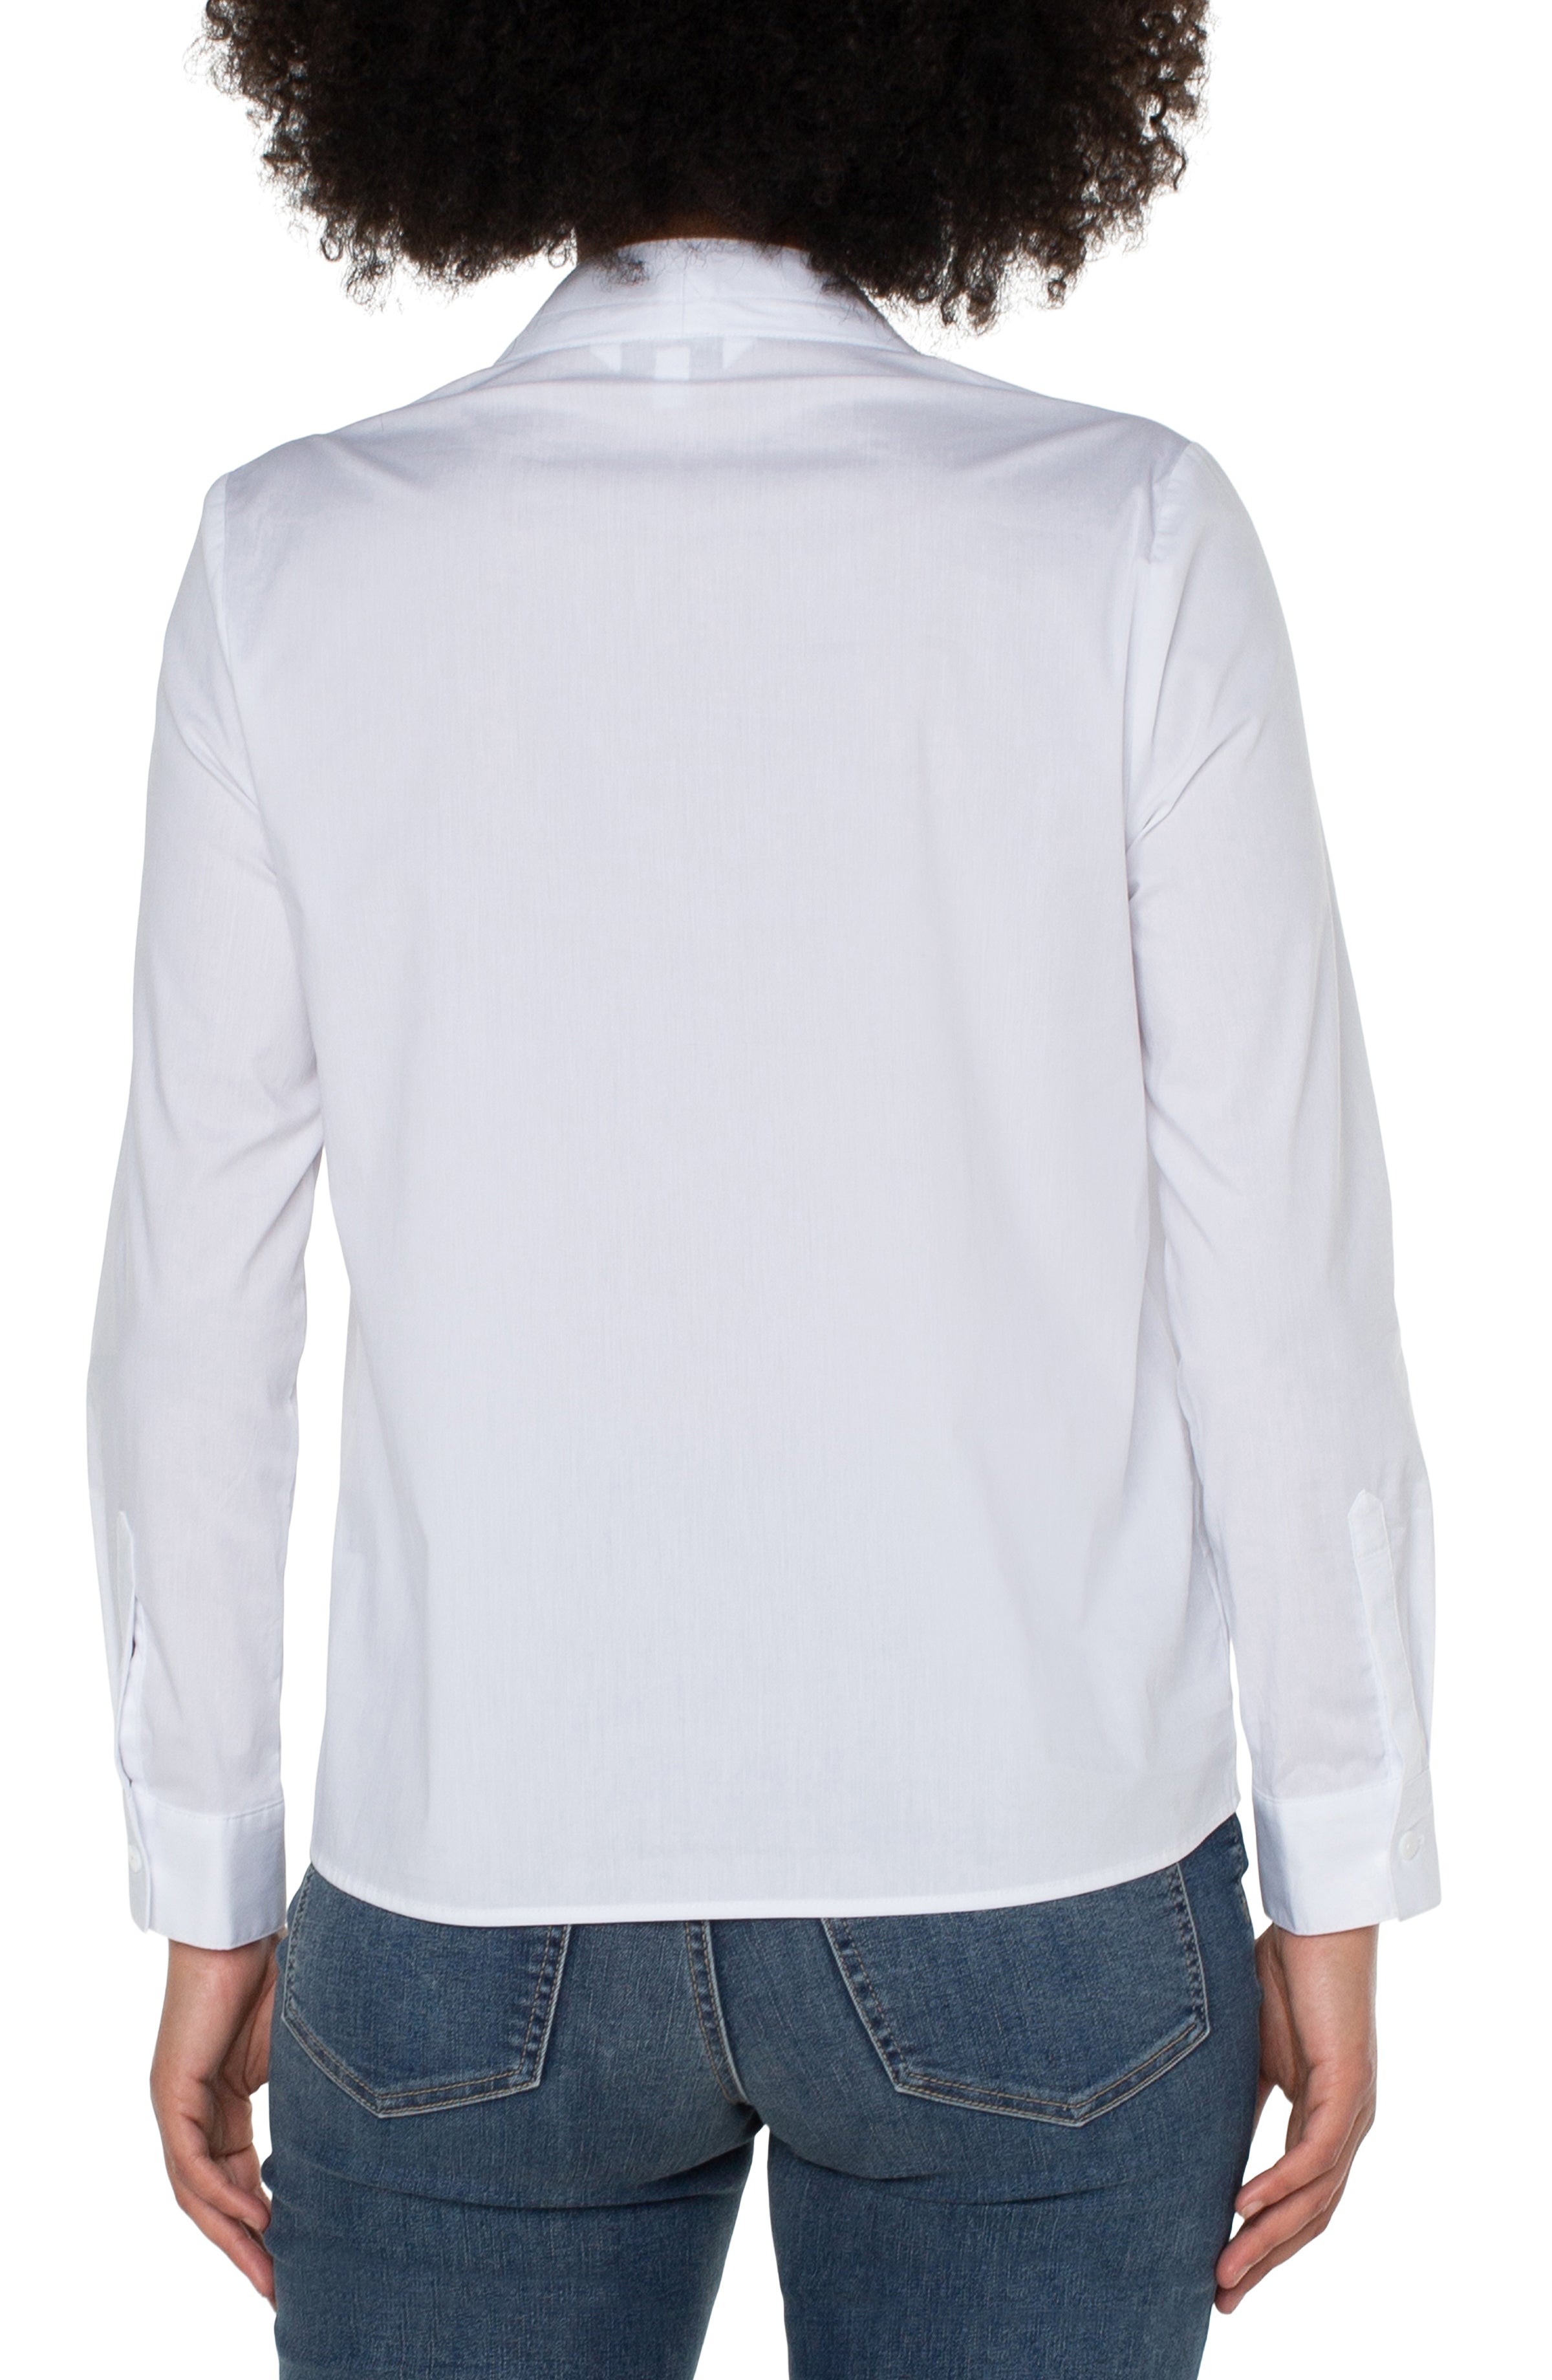 Liverpool V Neck Long Sleeve Woven Top - White